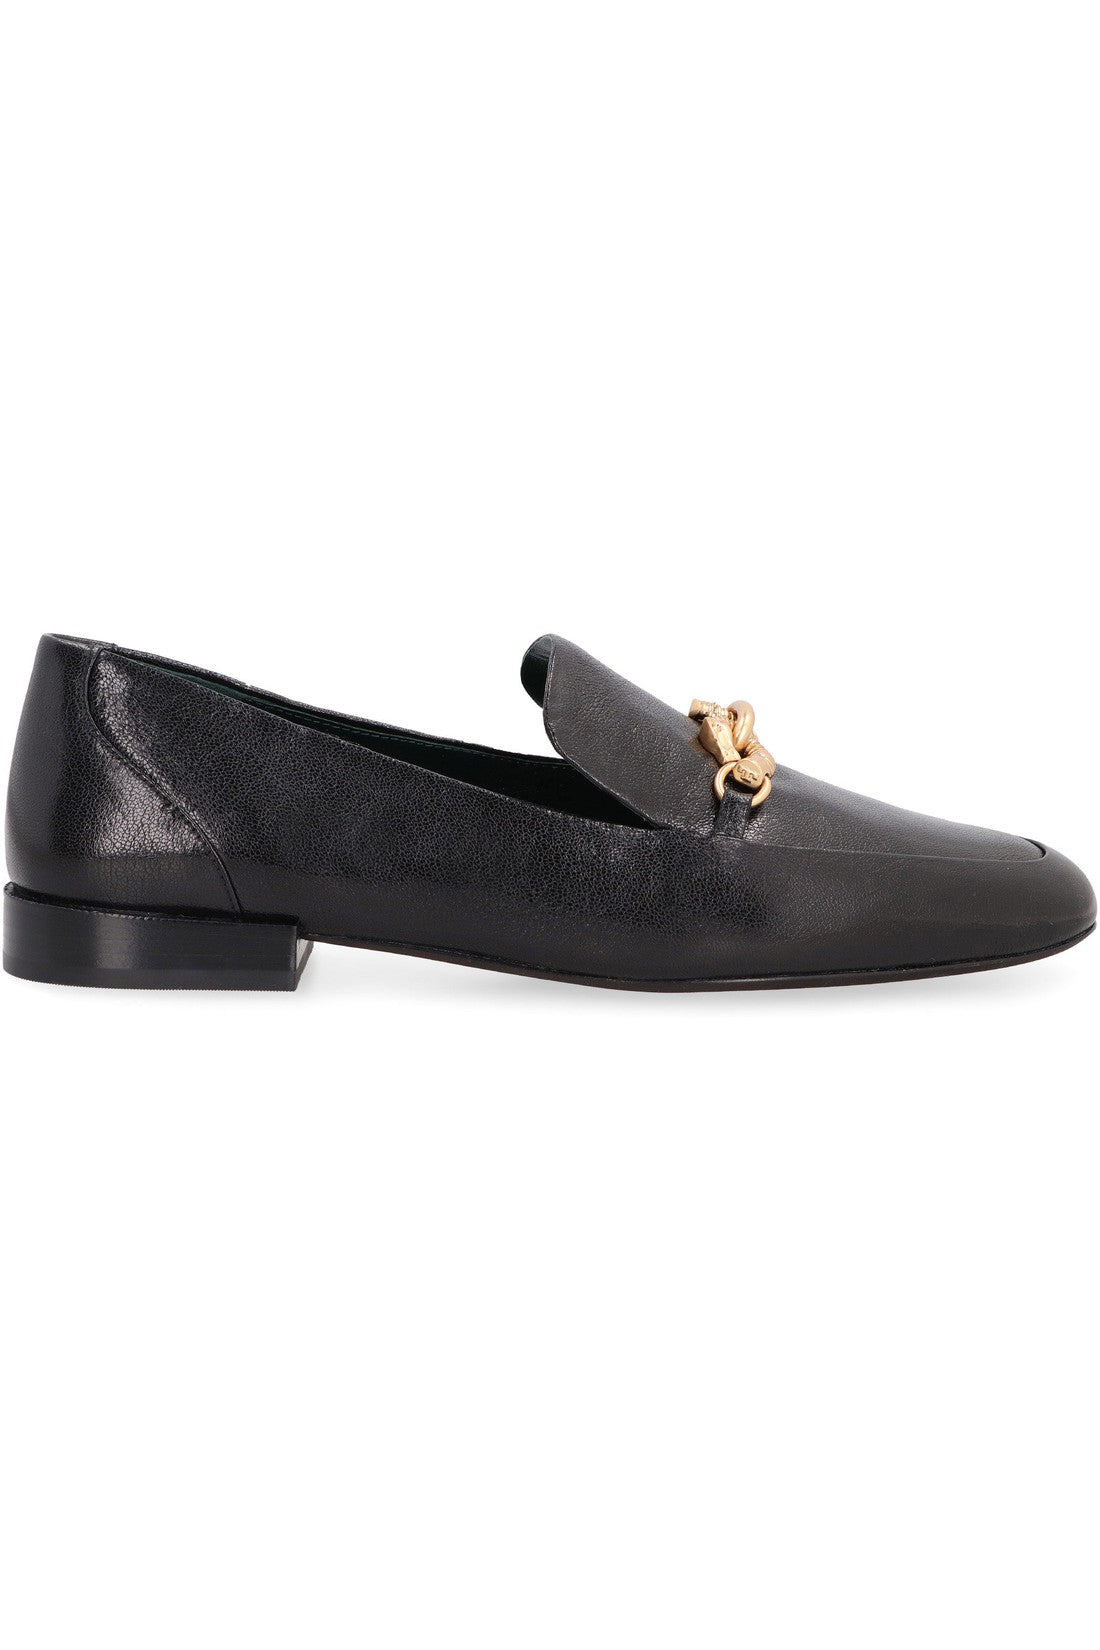 Tory Burch-OUTLET-SALE-Jessa leather loafers-ARCHIVIST